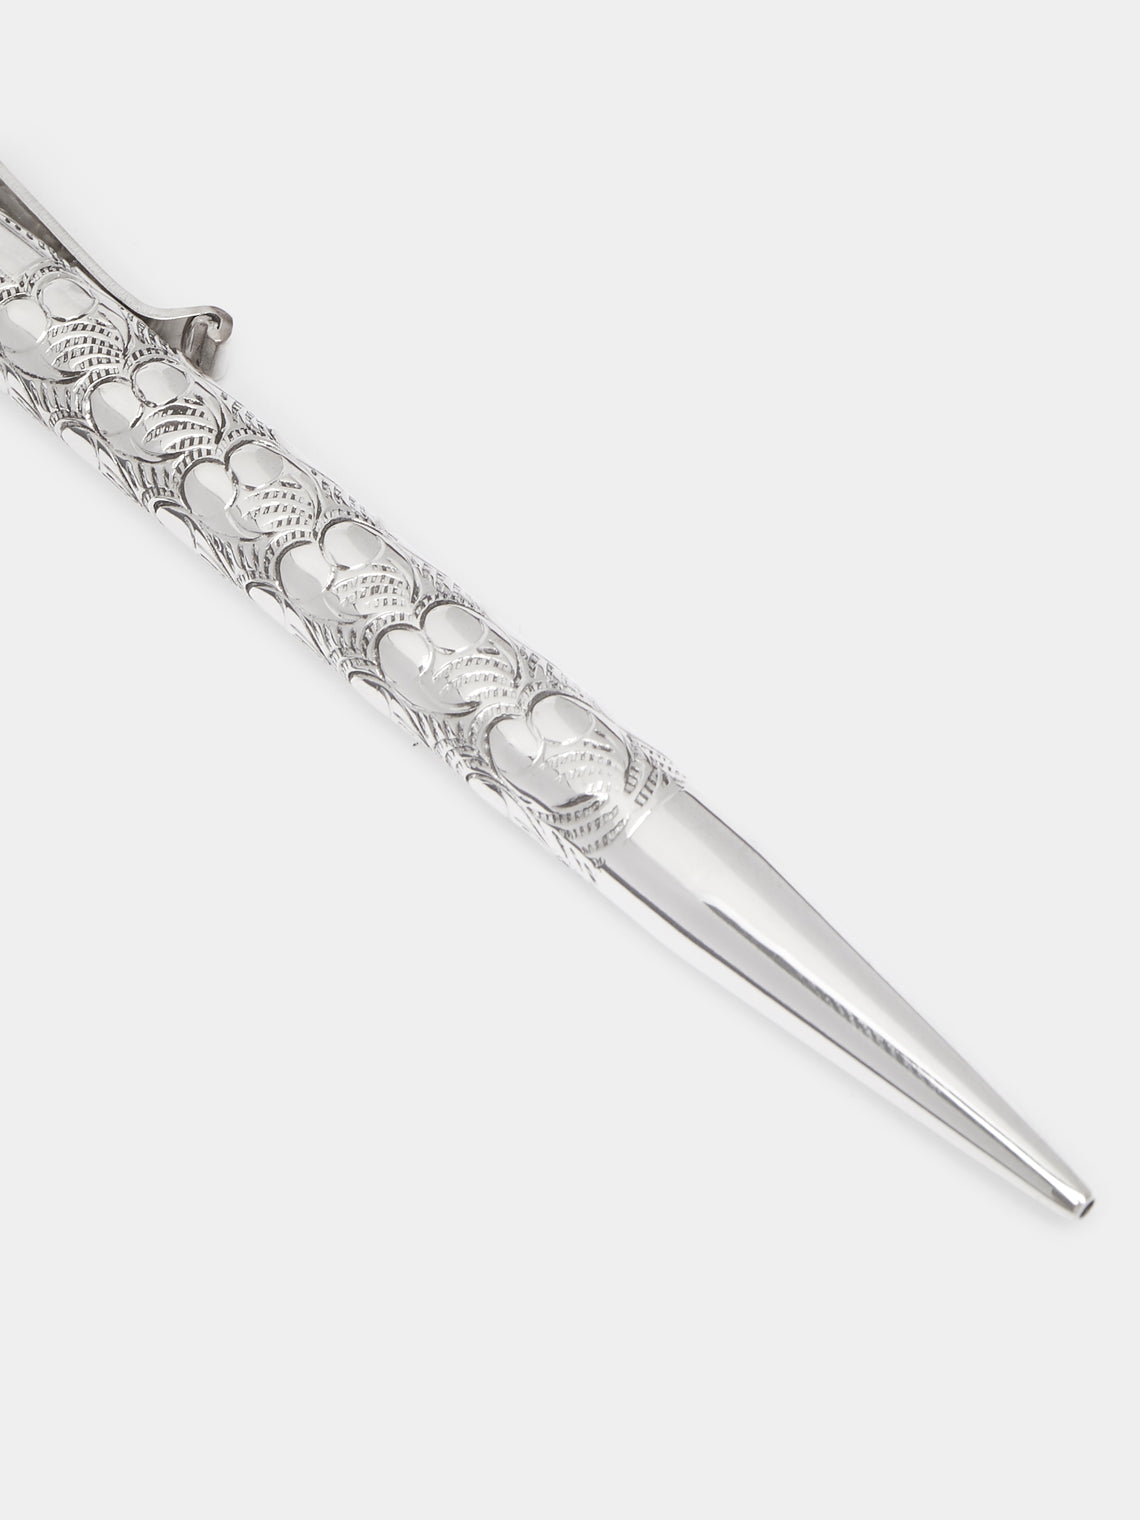 Yard O Led - Perfecta Victorian Sterling Silver Pencil - Silver - ABASK